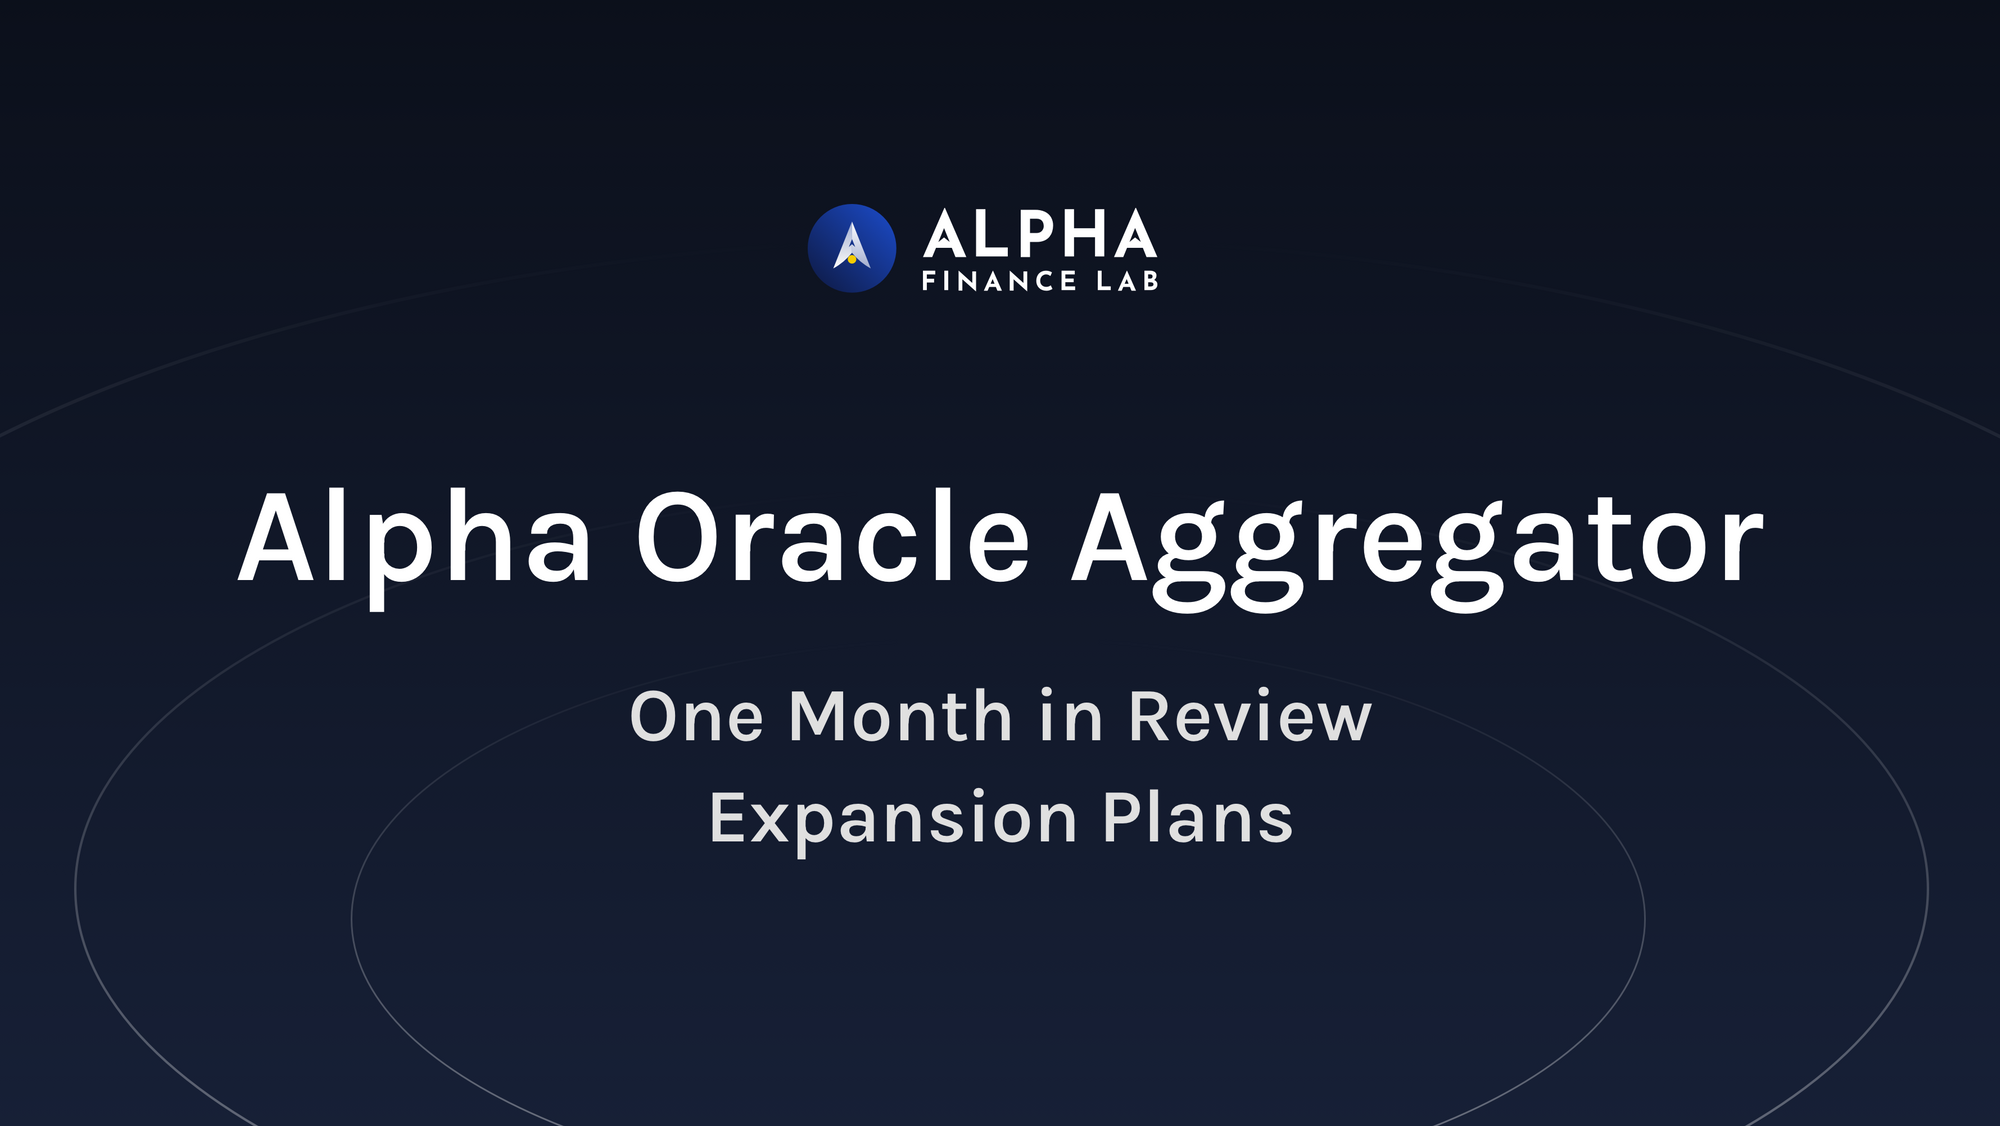 Alpha Oracle Aggregator: One Month in Review and Expansion Plans